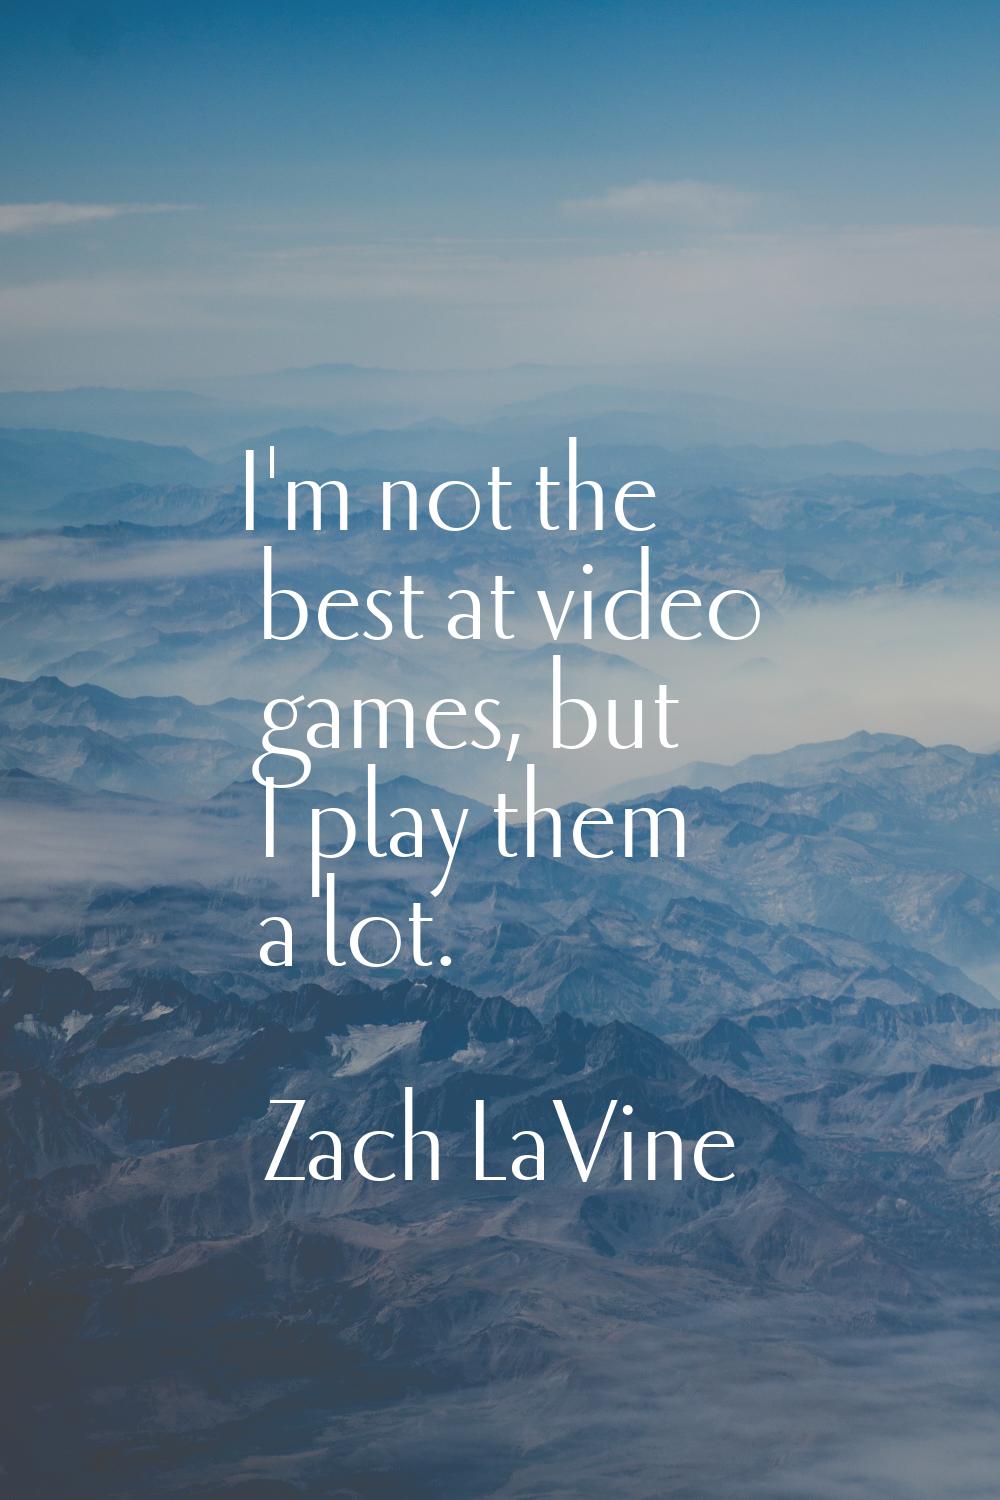 I'm not the best at video games, but I play them a lot.